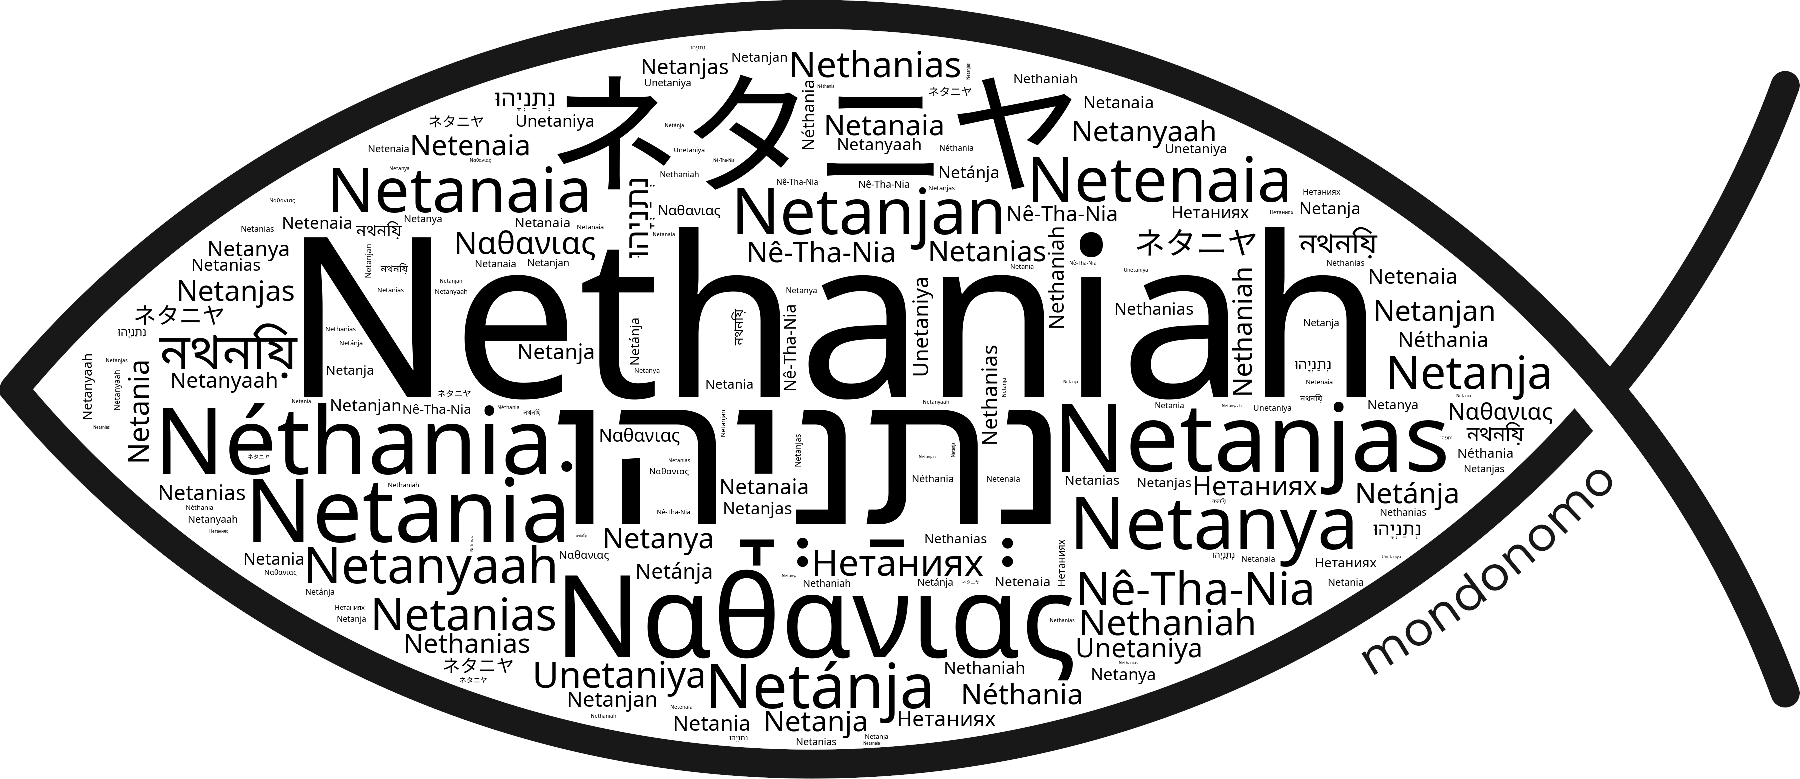 Name Nethaniah in the world's Bibles